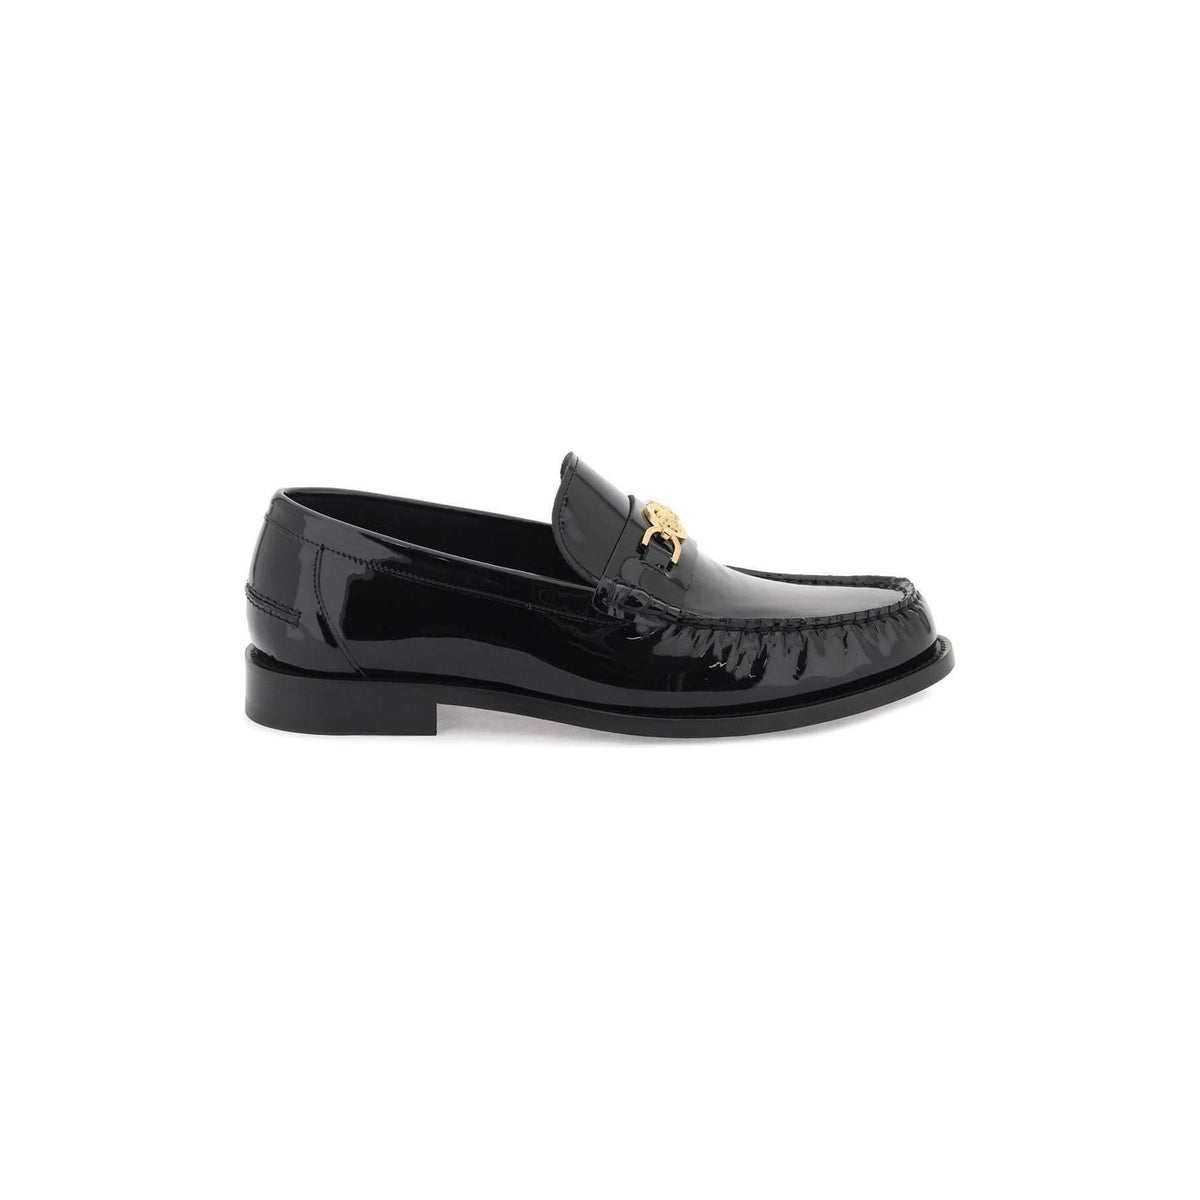 VERSACE - Black Patent Leather Medusa '95 Loafers With Gold Detail - JOHN JULIA